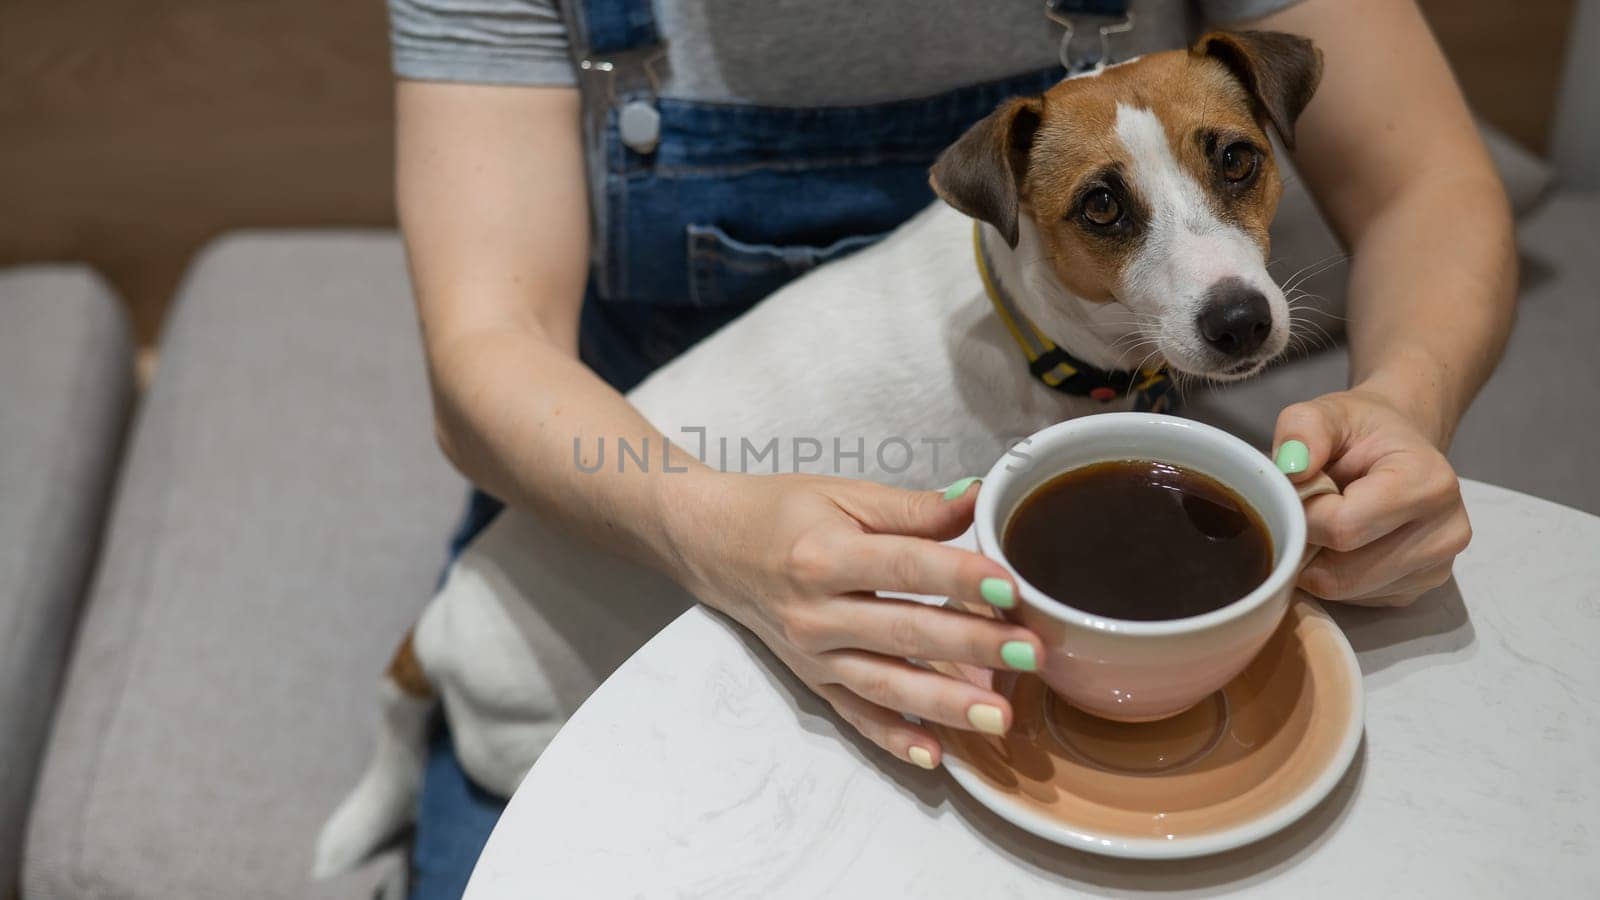 Jack Russell sits on the lap of the hostess in a cafe. Woman drinking coffee in a dog friendly cafe. by mrwed54